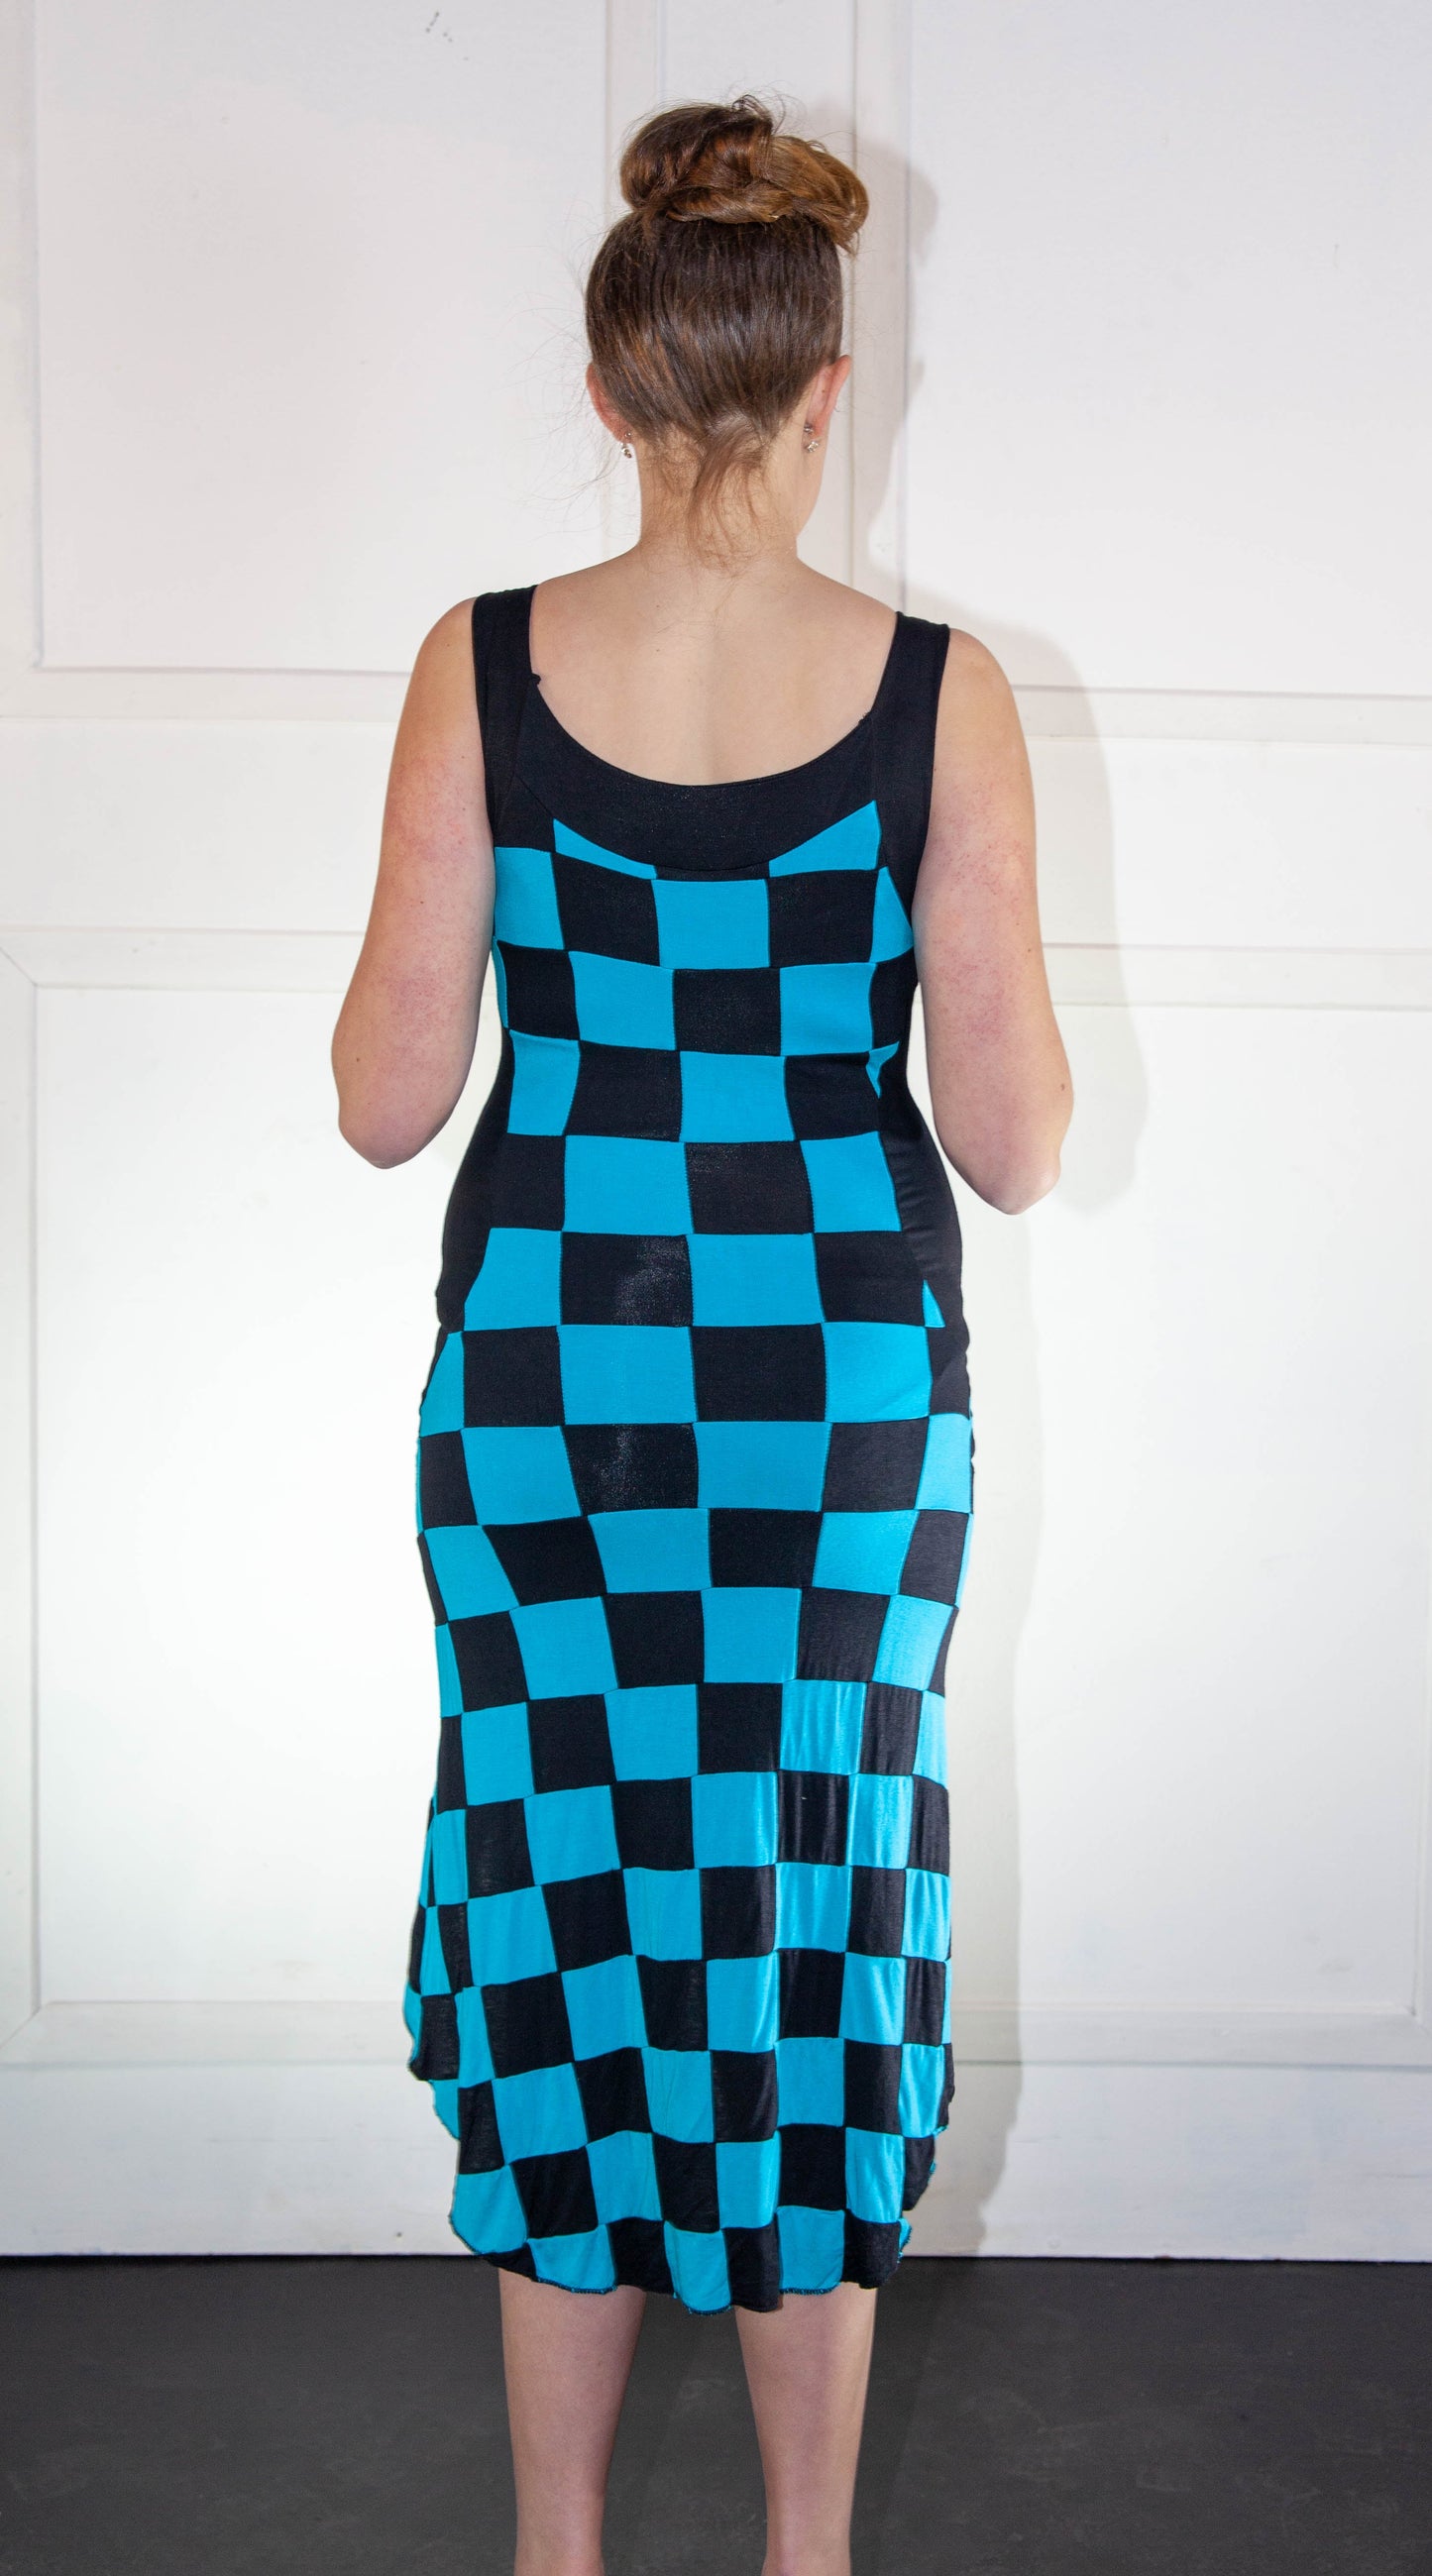 Summer Dress - High Low Checkered Turquoise & Black